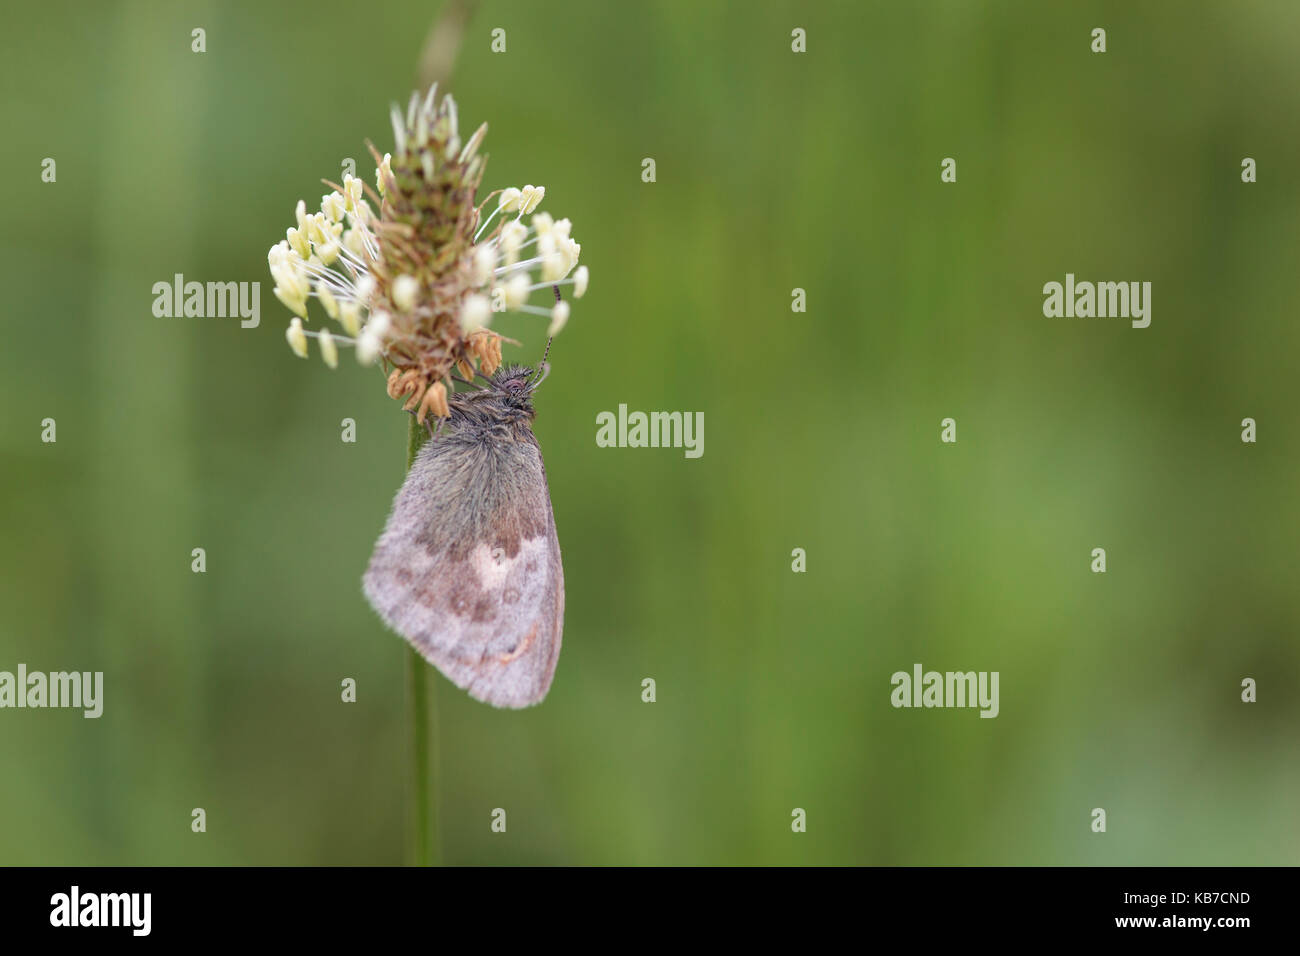 One Small Heath (Coenonympha pamphilus) perched on flower of a Narrowleaf Plantain (Plantago lanceolata), the Netherlands, gelderland, Fikkersdries Stock Photo